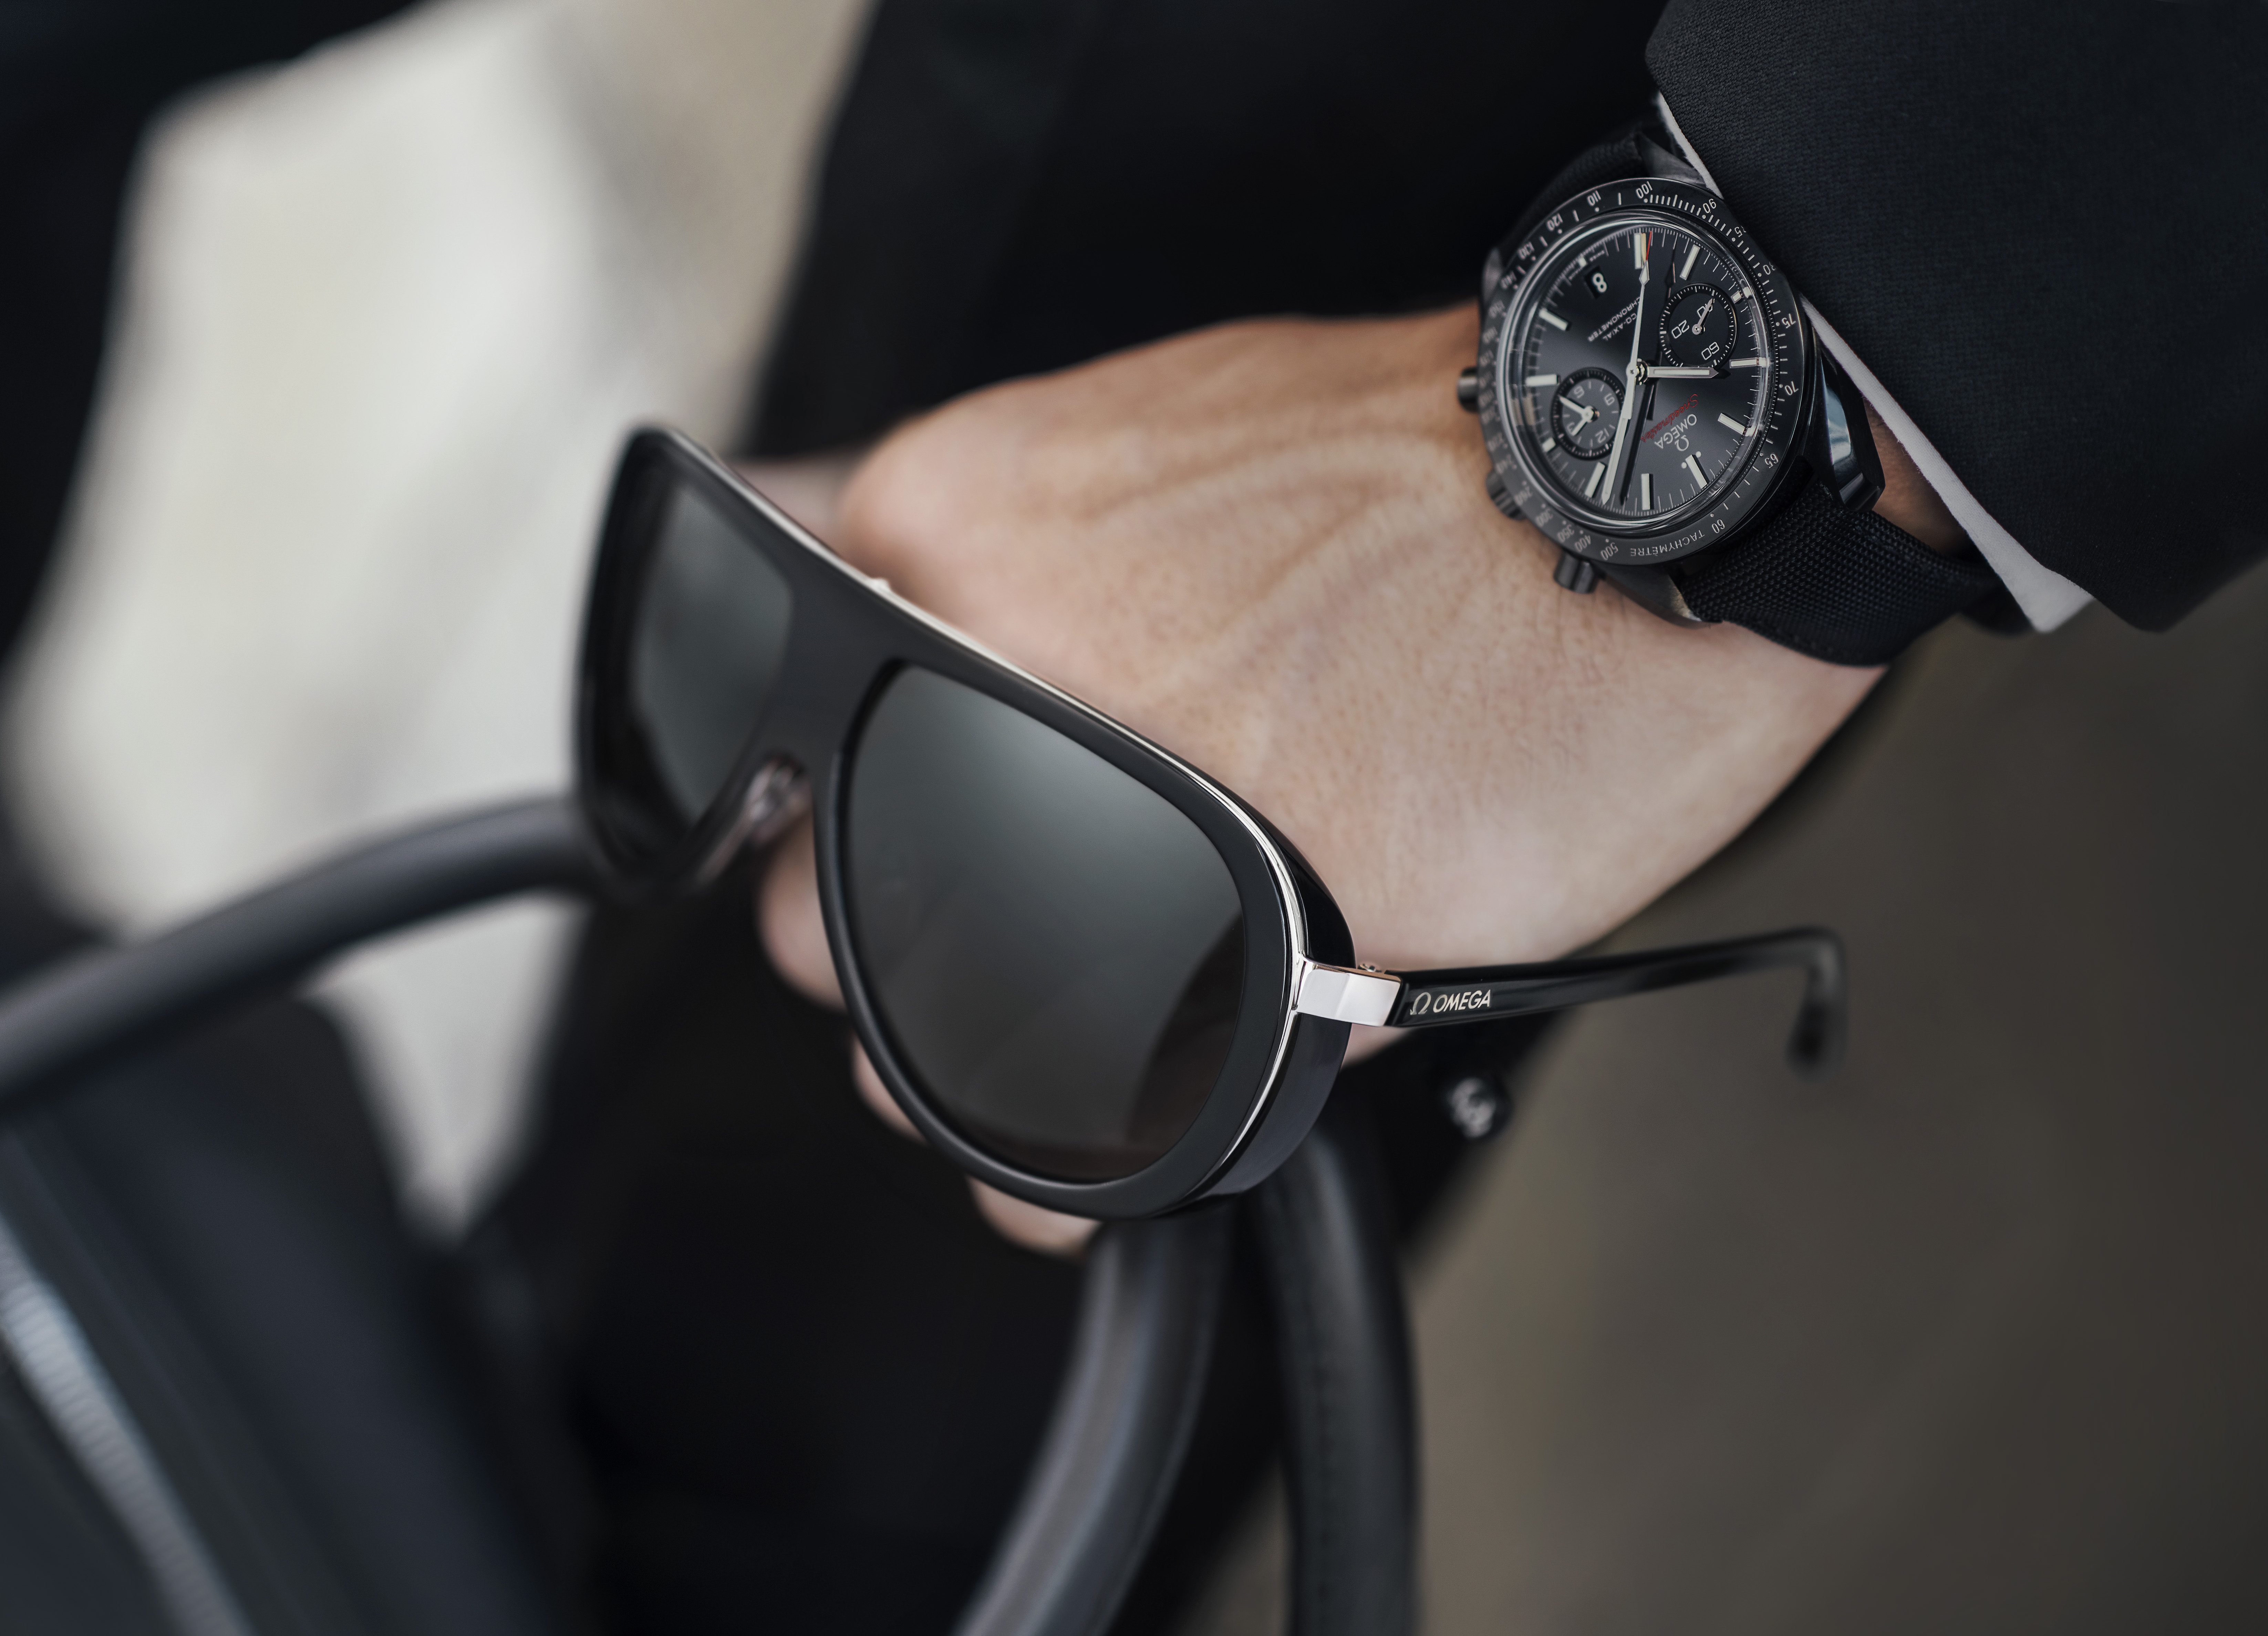 News : High quality replica Omega launches eyewear collection